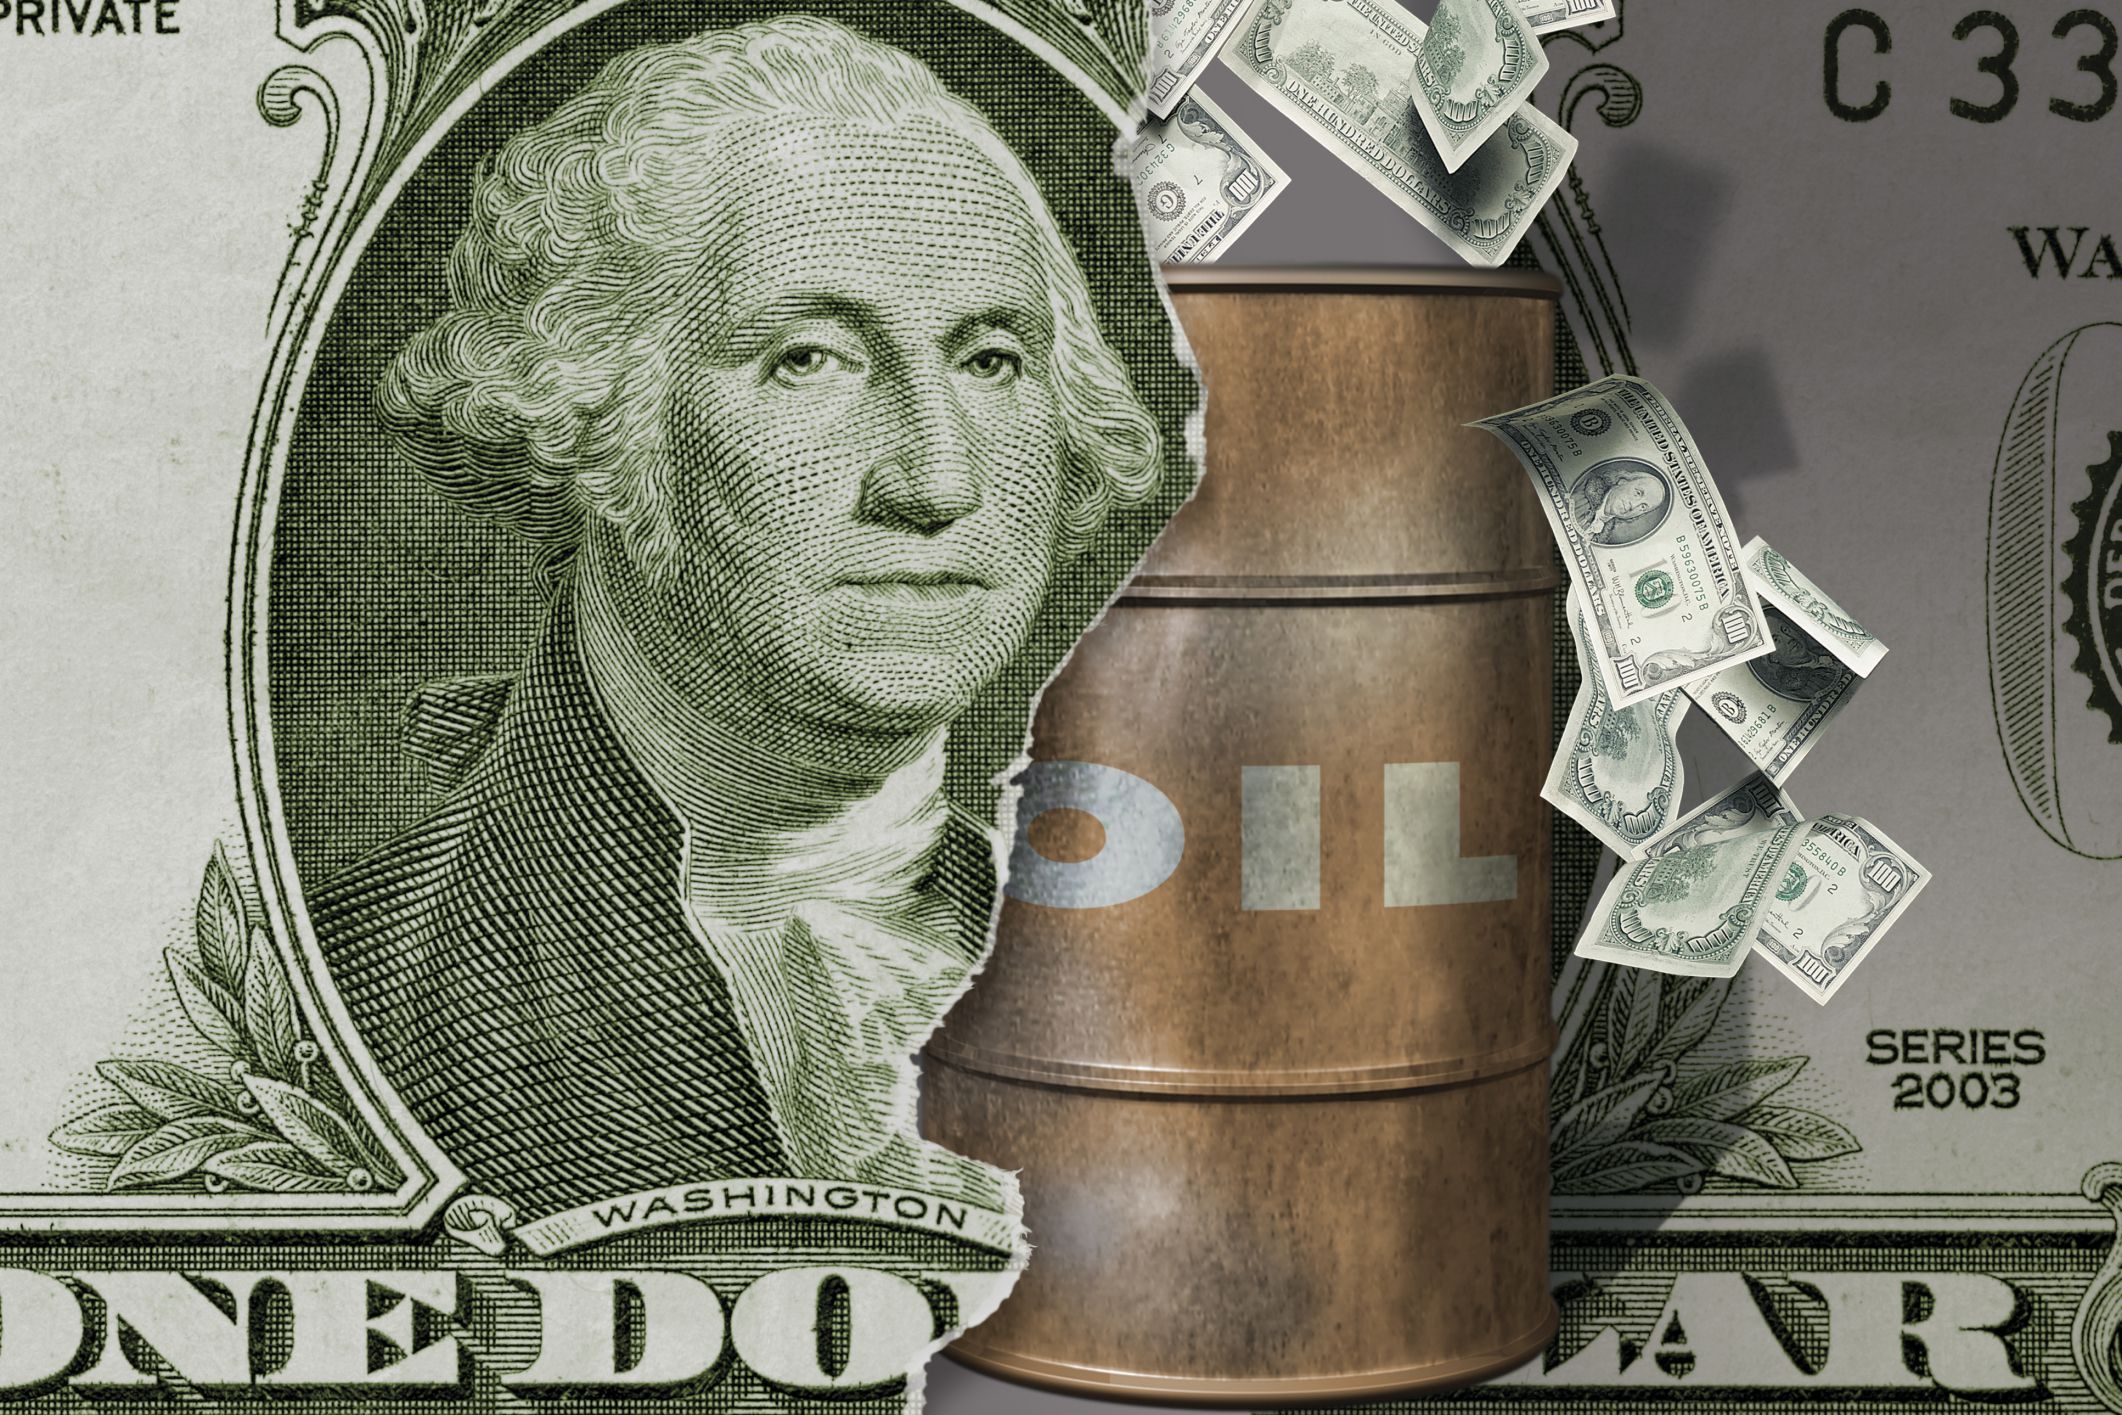 Petrodollar: Definition, Collapse, System, Recycling